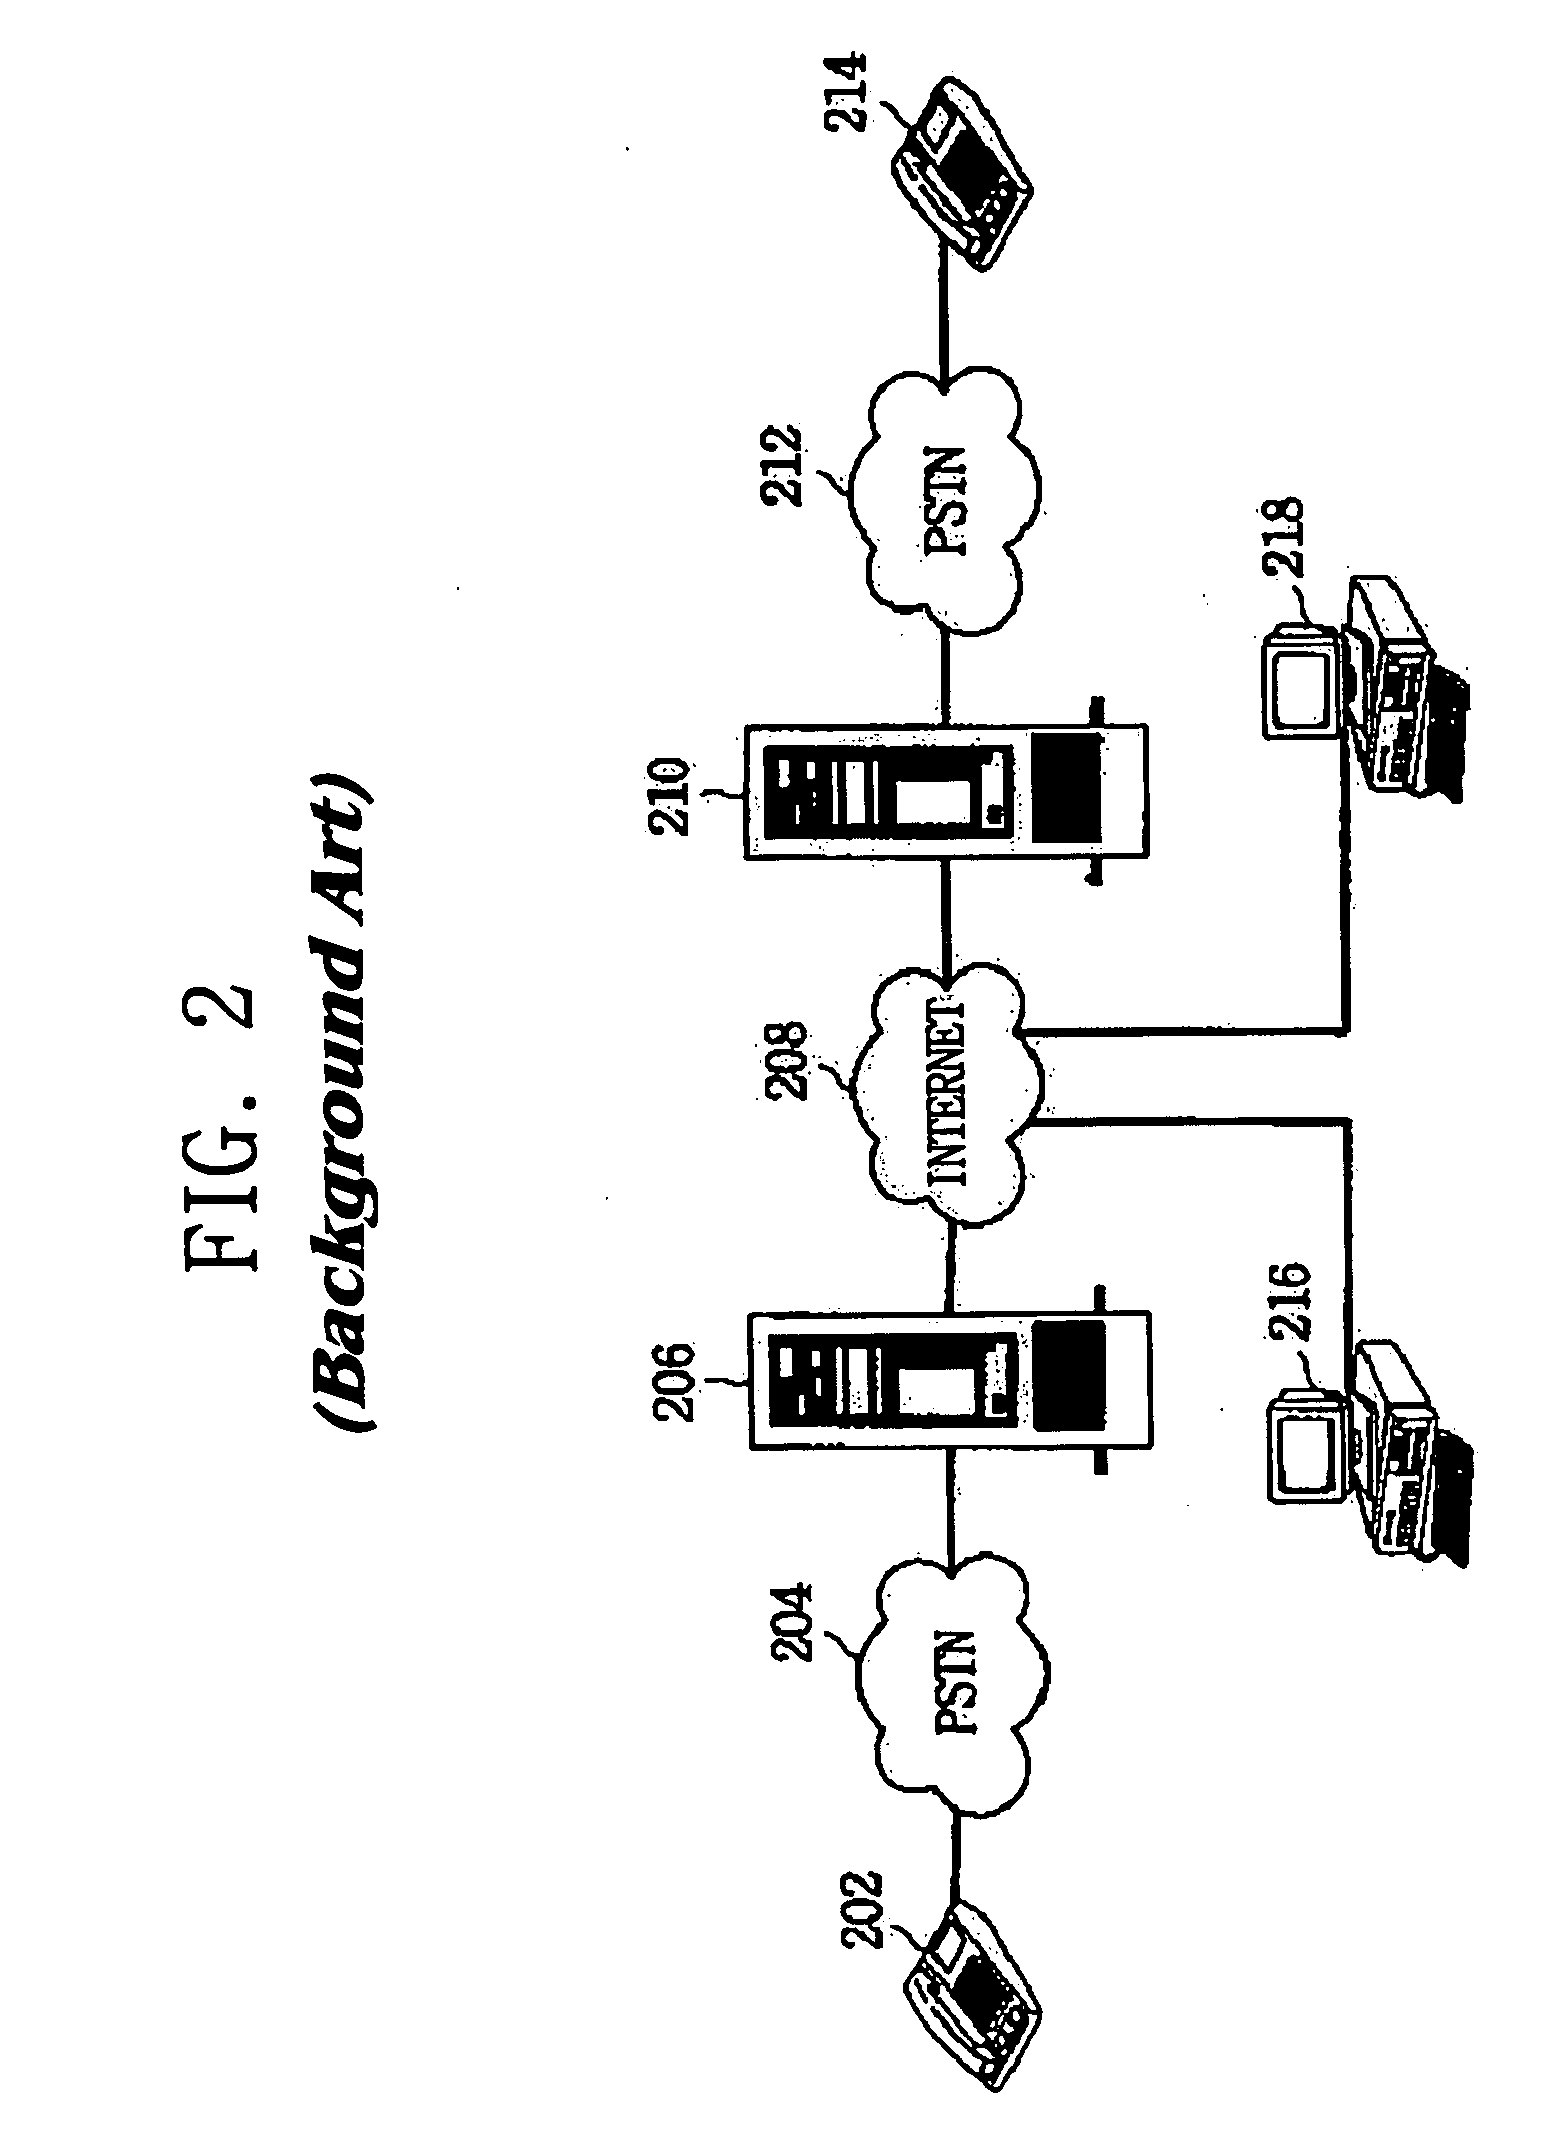 Voice over internet protocol system having dynamic gain control function and method thereof